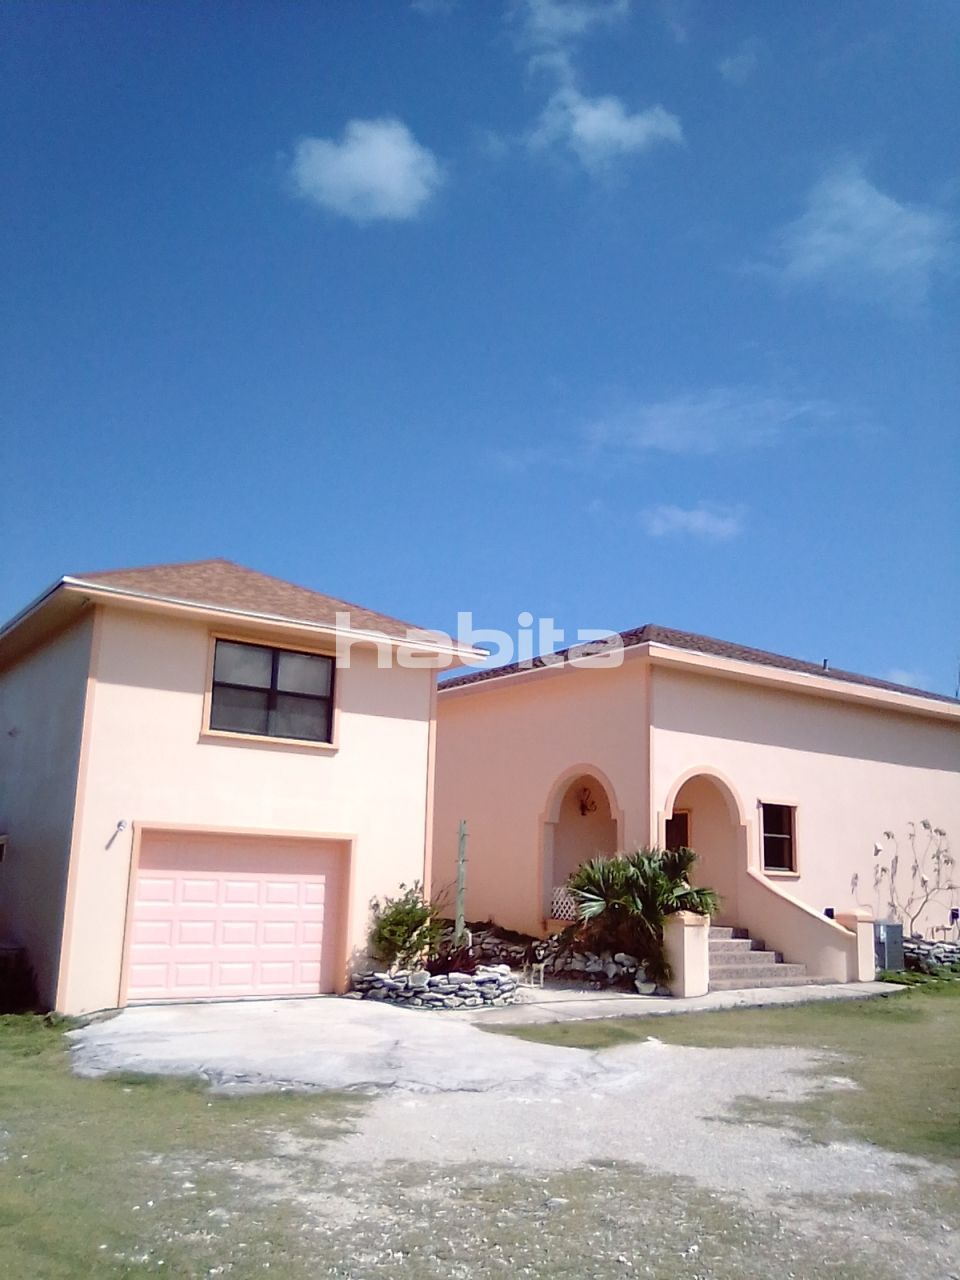 Wohnung in Abaco-Inseln, Bahamas, 193 m2 - Foto 1